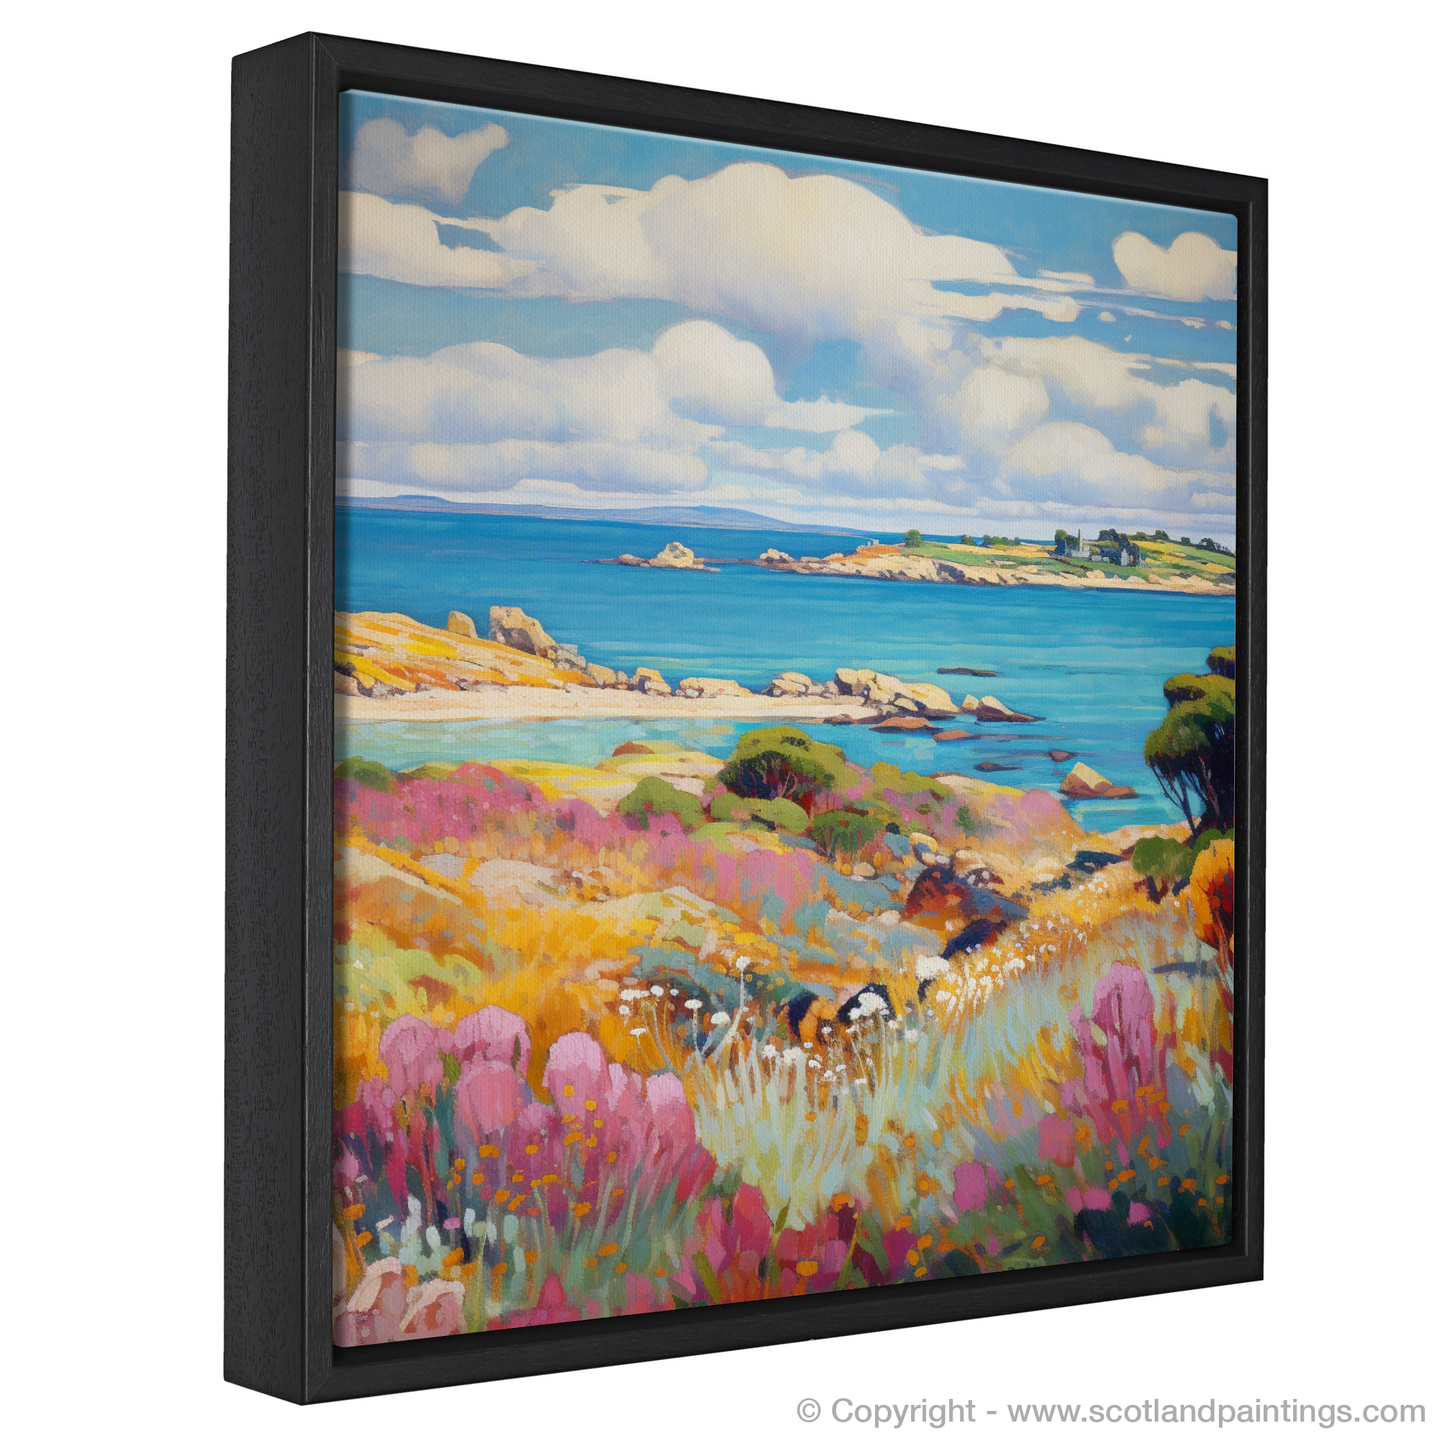 Painting and Art Print of Isle of Gigha, Inner Hebrides in summer entitled "Summer Impressions of Isle of Gigha".